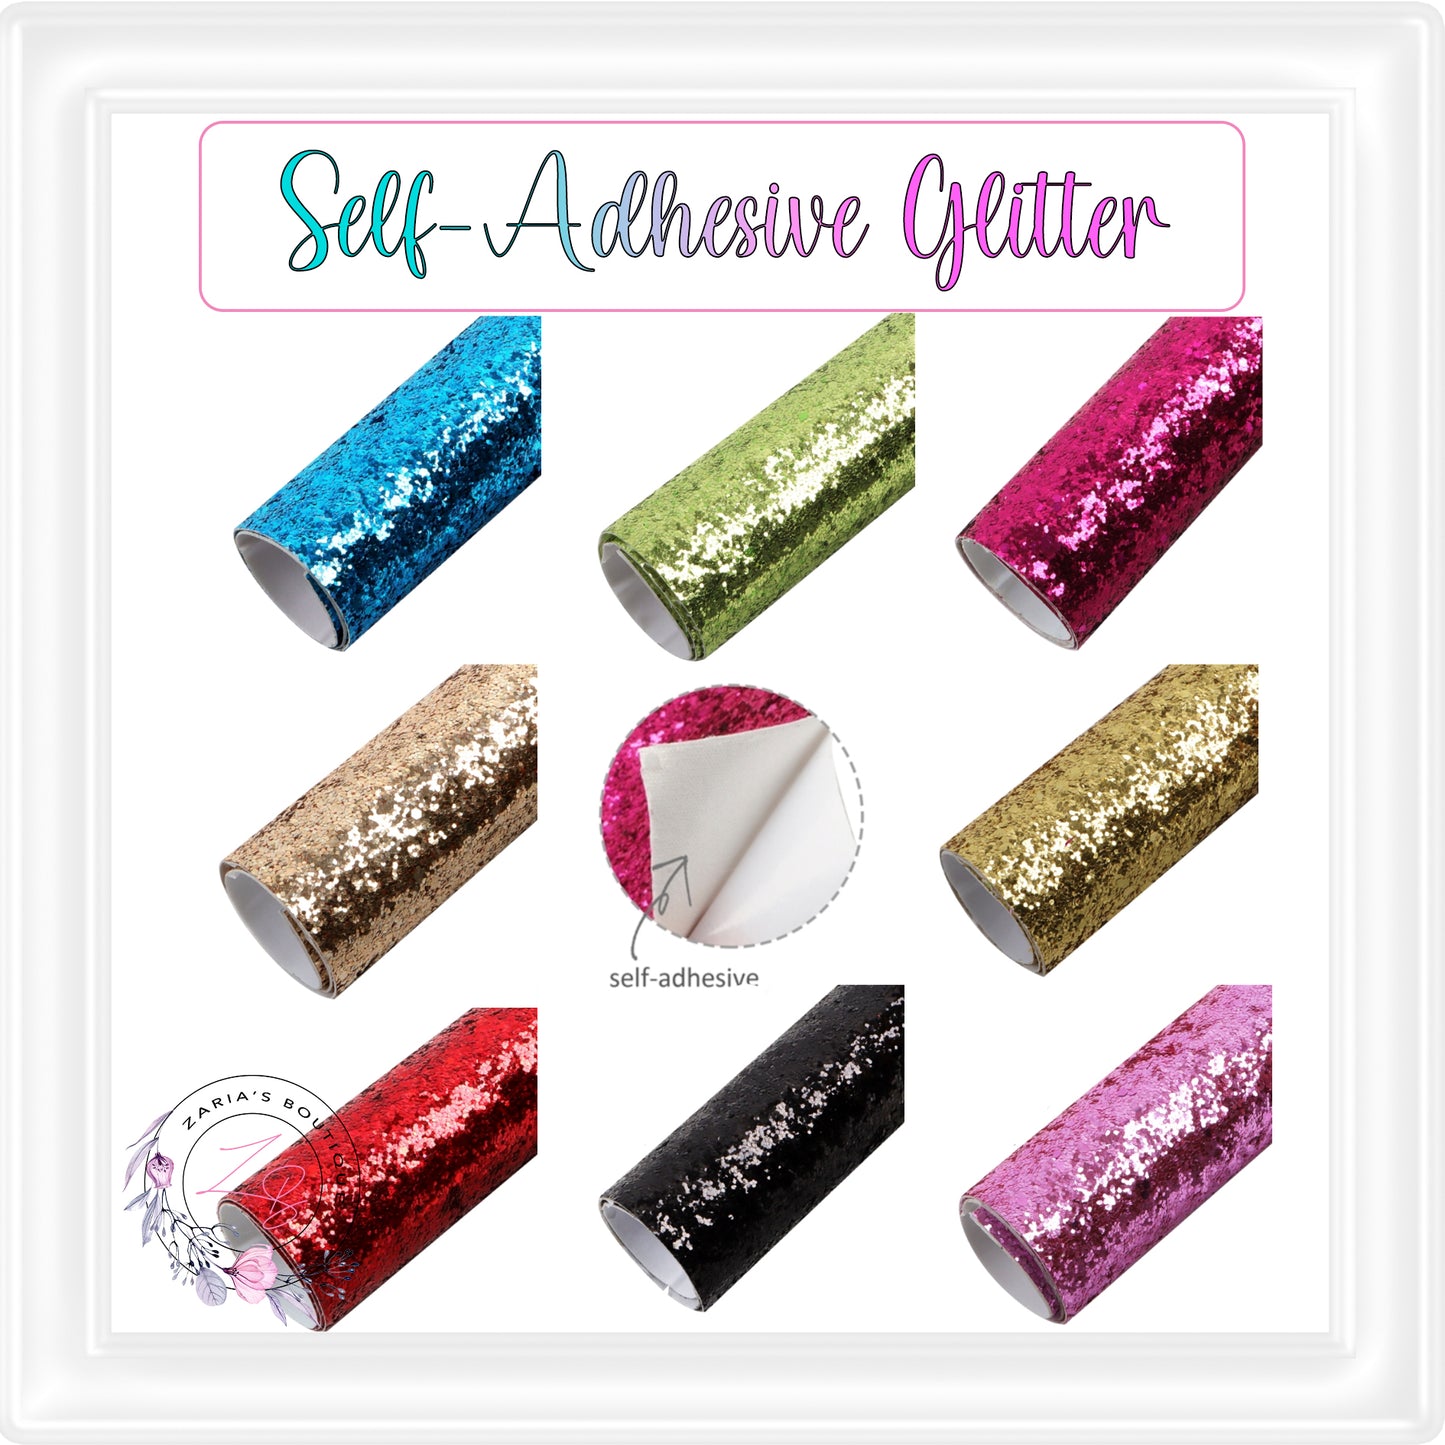 ⋅ Self-Adhesive Backed Medium Glitter ⋅ For Double-Sided Projects ⋅ CHAMPAGNE ⋅